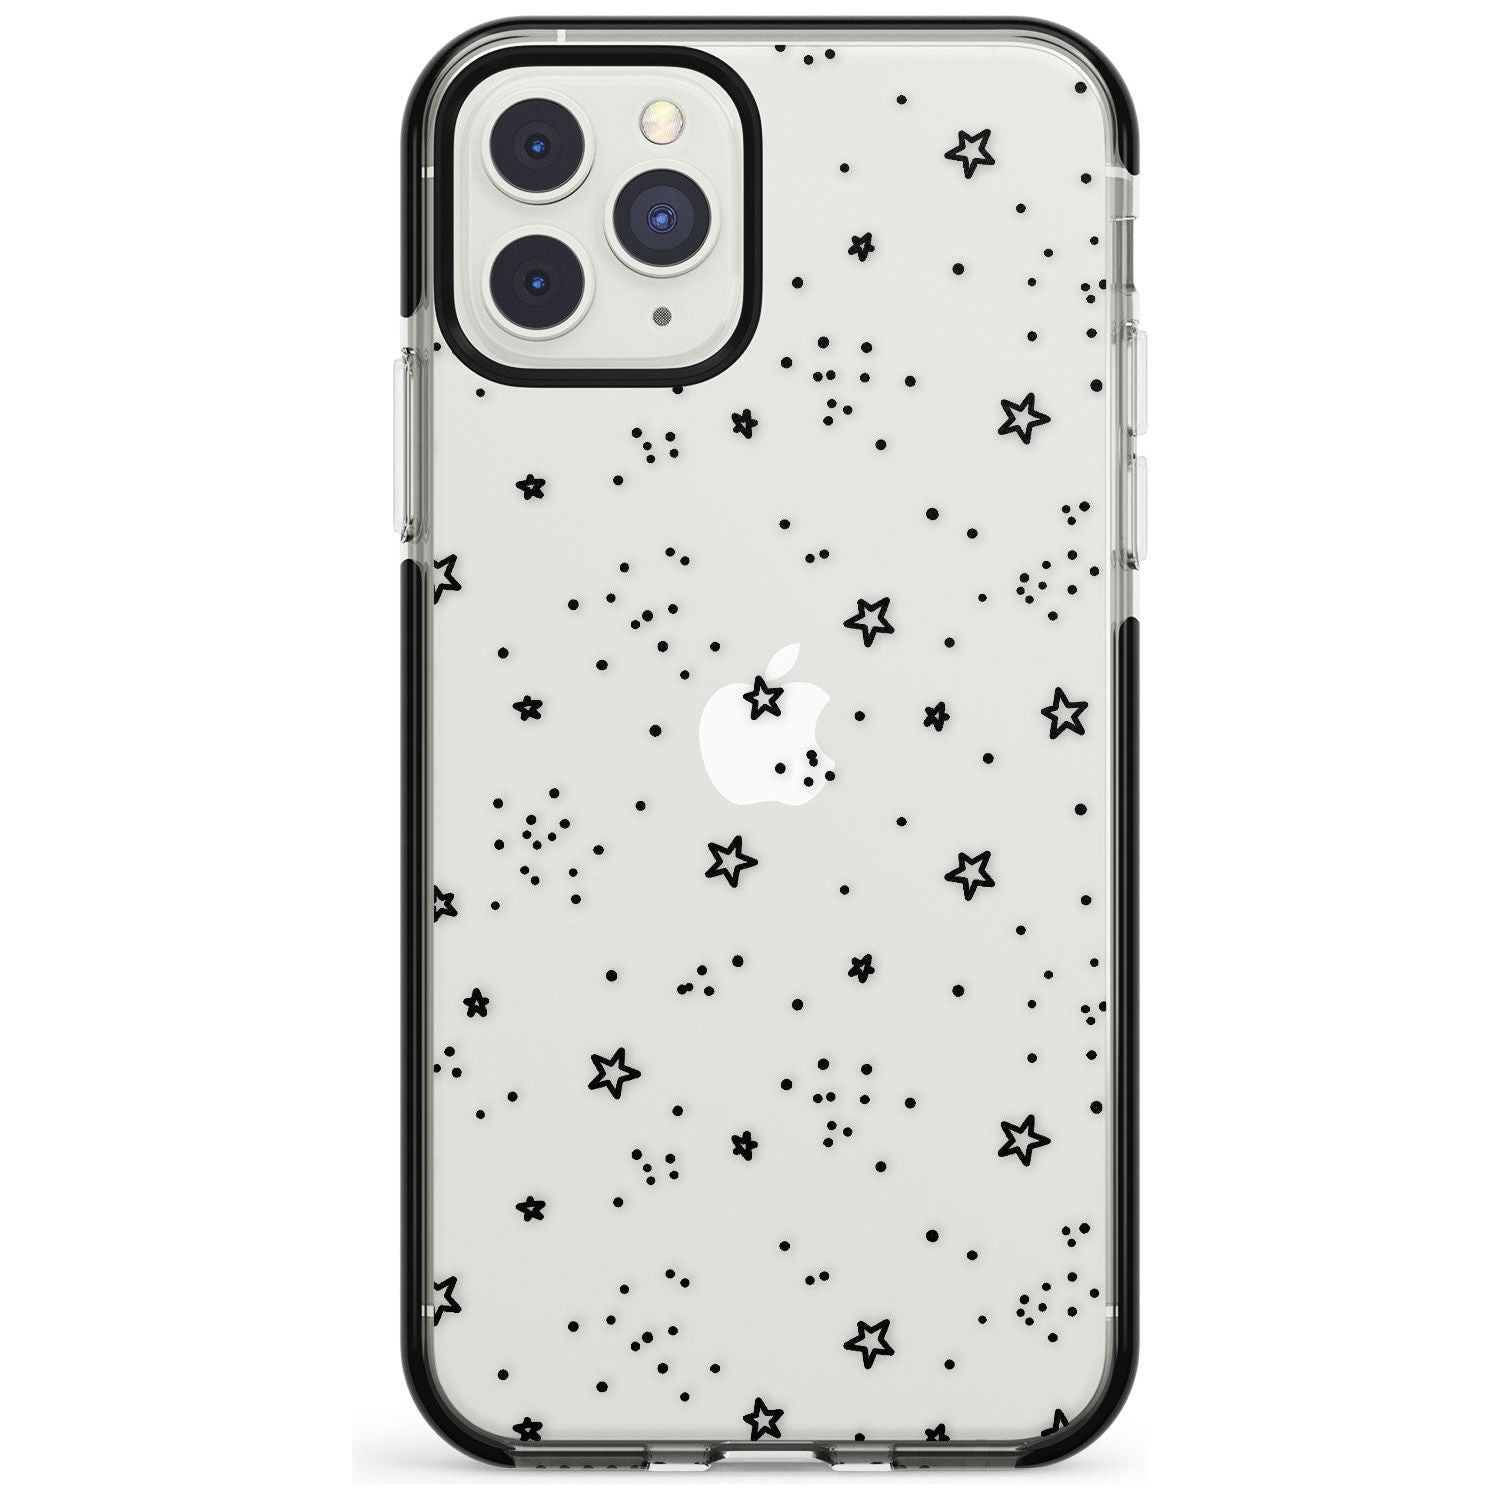 Star Outlines Black Impact Phone Case for iPhone 11 Pro Max